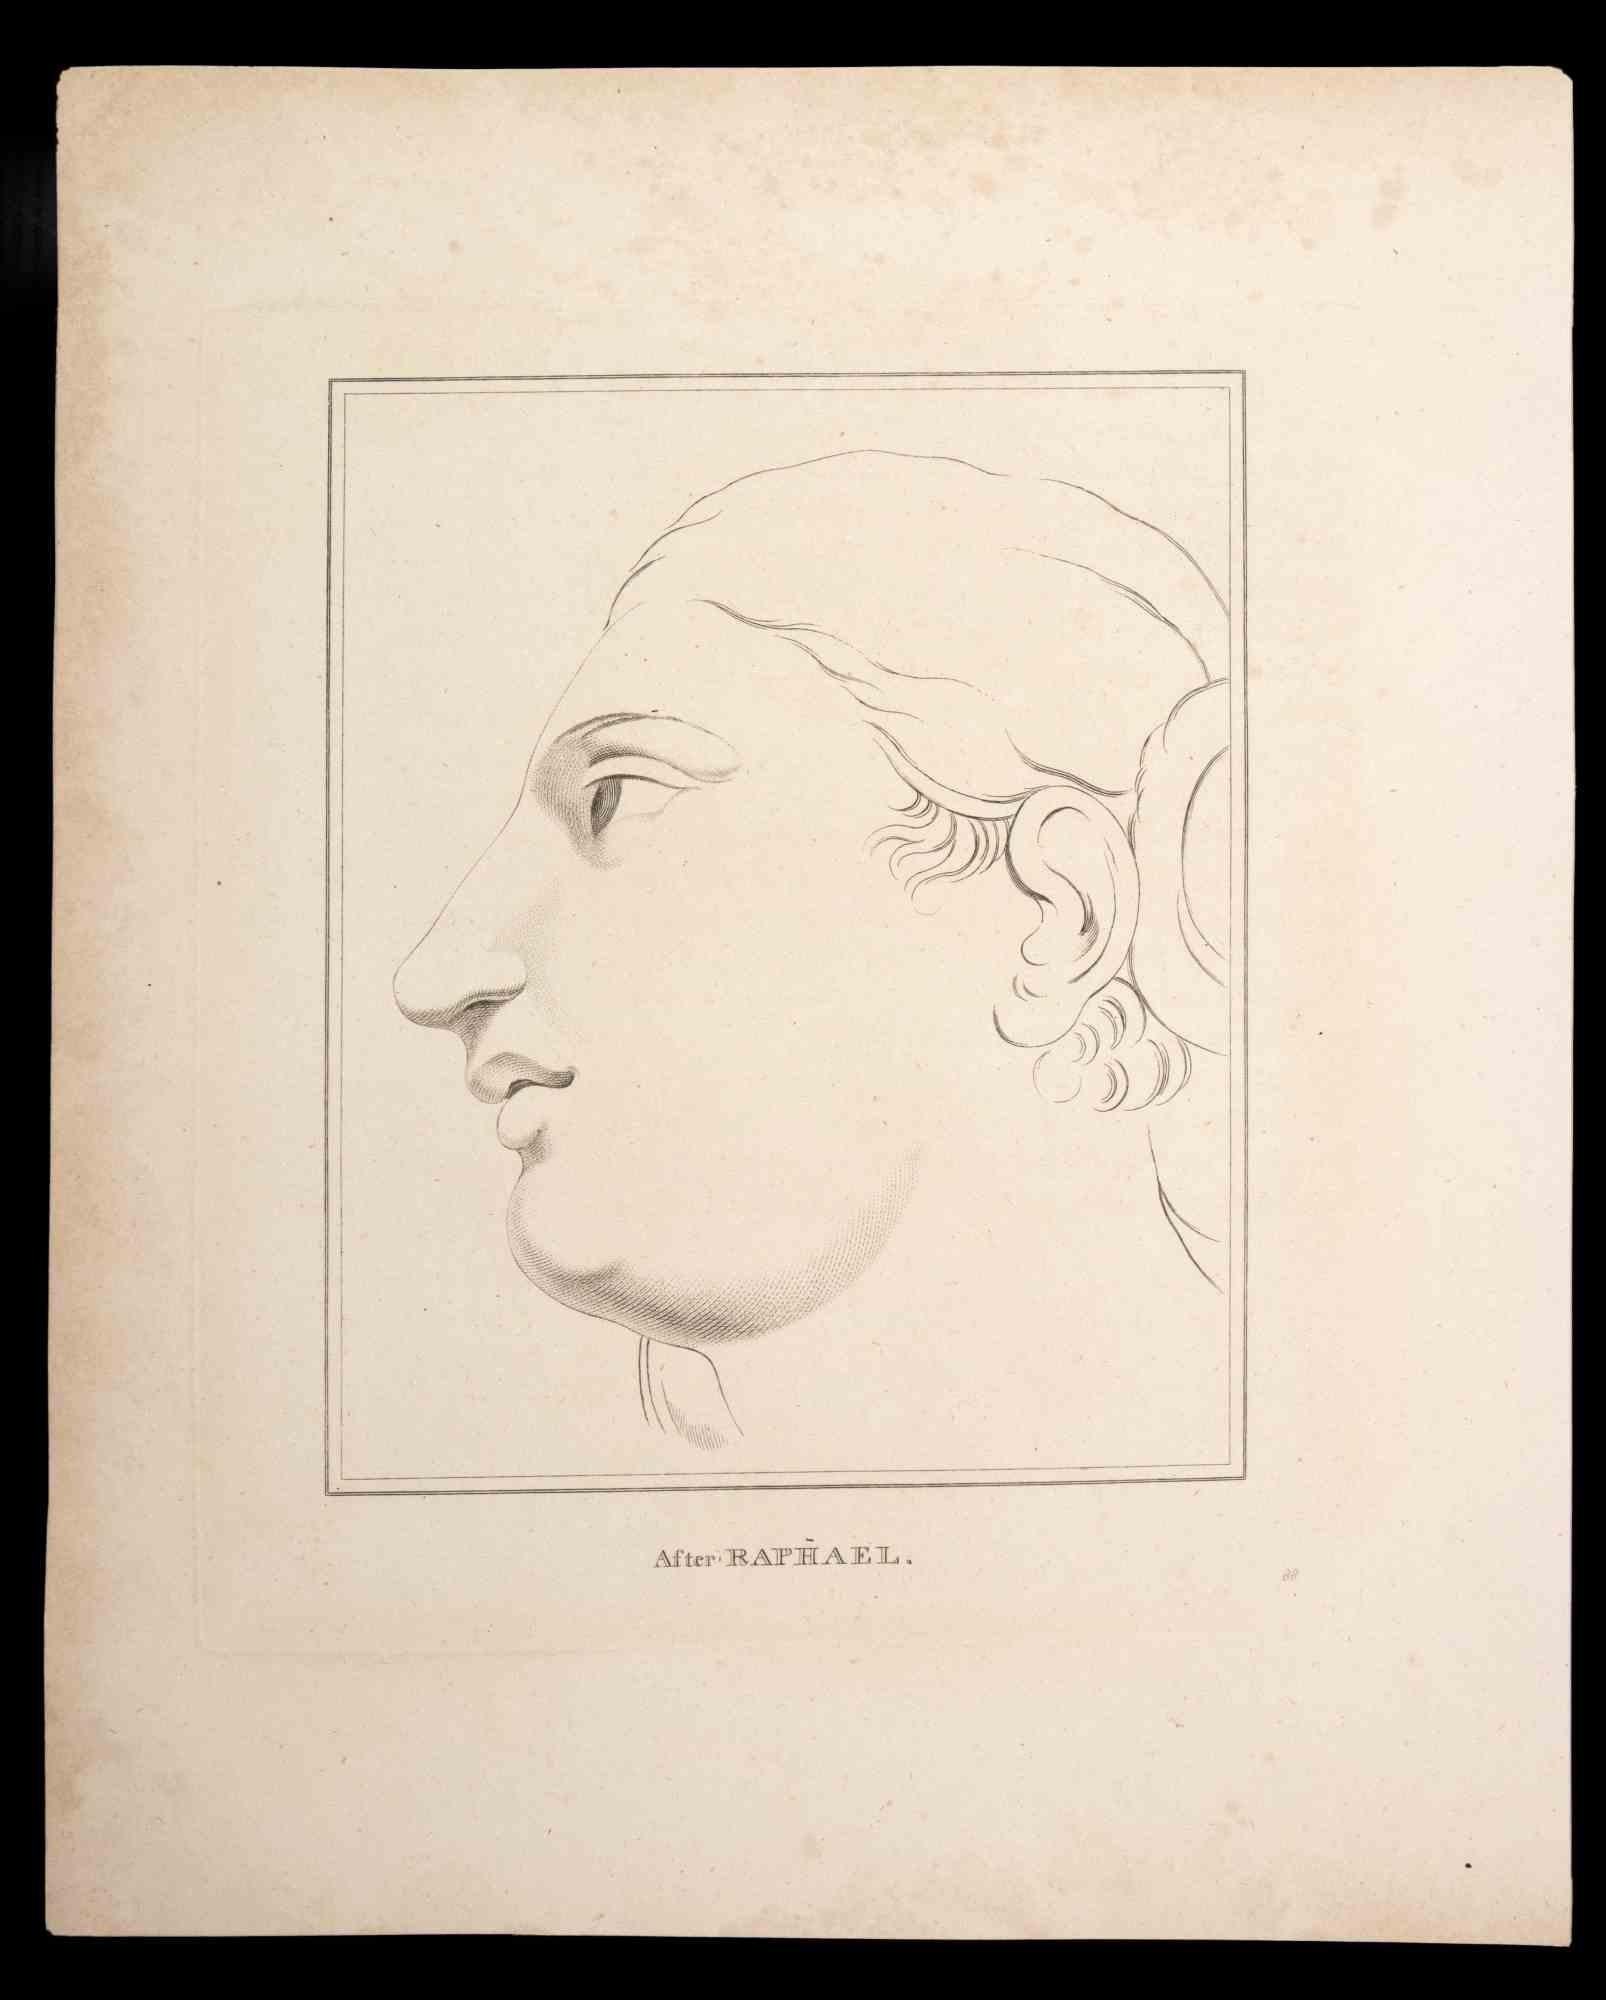 Portrait after Raphael is an original etching artwork realized by Thomas Holloway for Johann Caspar Lavater's "Essays on Physiognomy, Designed to Promote the Knowledge and the Love of Mankind", London, Bensley, 1810. 

Engraved on the lower center